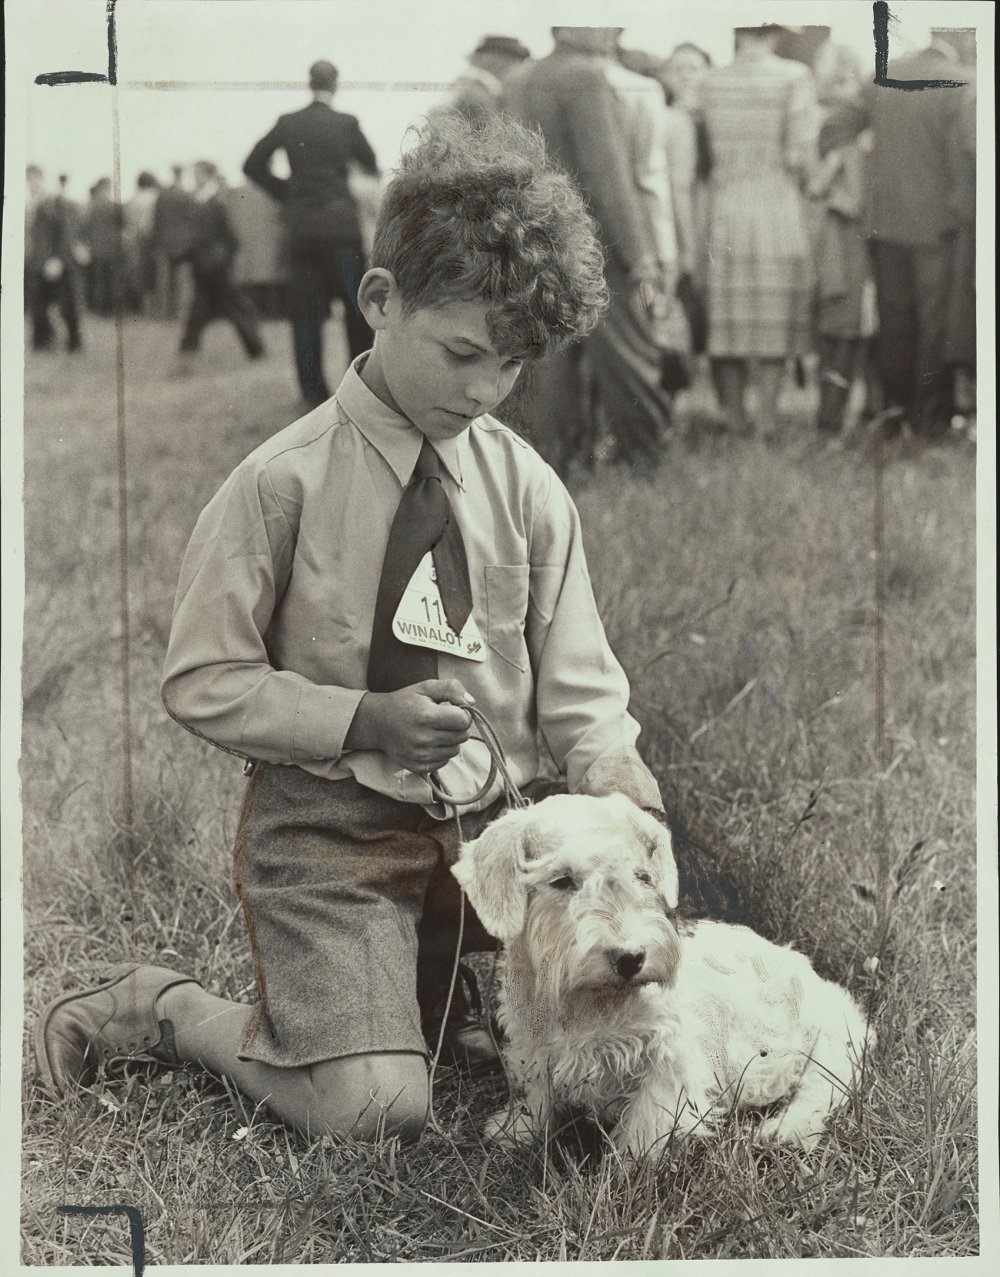 A young boy sitting on grass with a small white dog